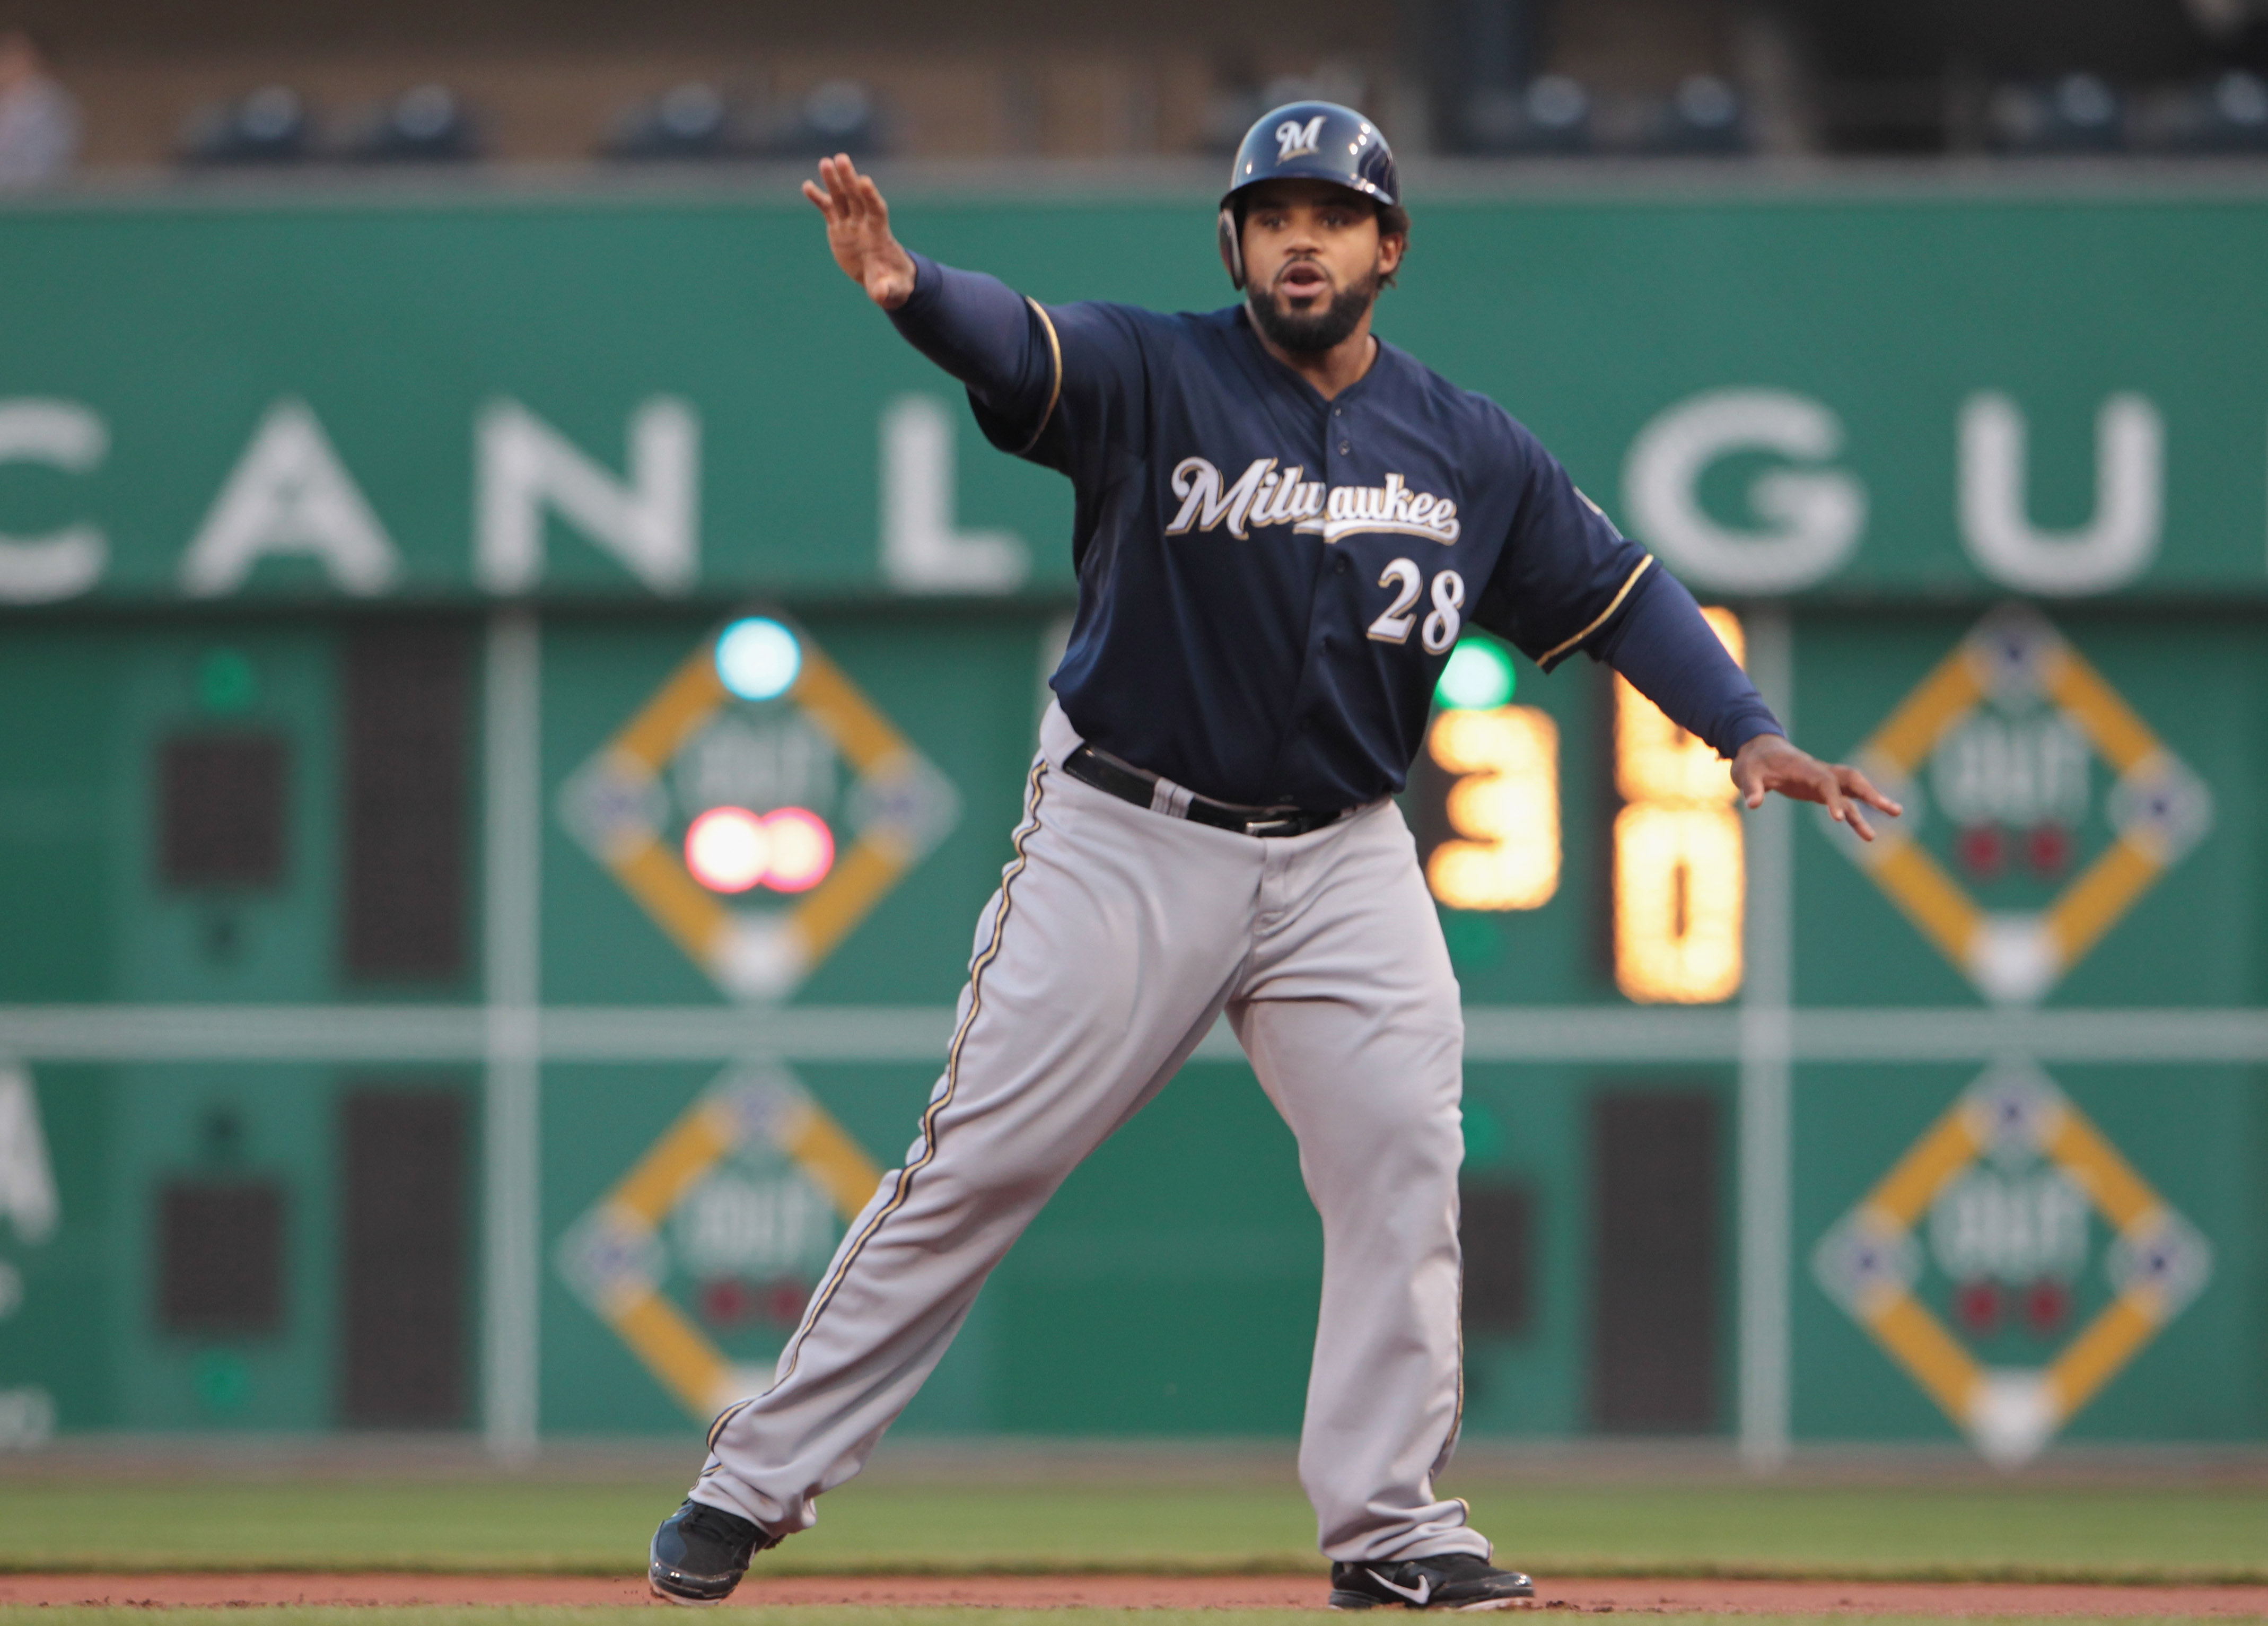 Milwaukee Brewers first baseman Prince Fielder (28) hits a double down the  first base line during the game between the Colorado Rockies and Milwaukee  Brewers at Miller Park in Milwaukee. The Brewers